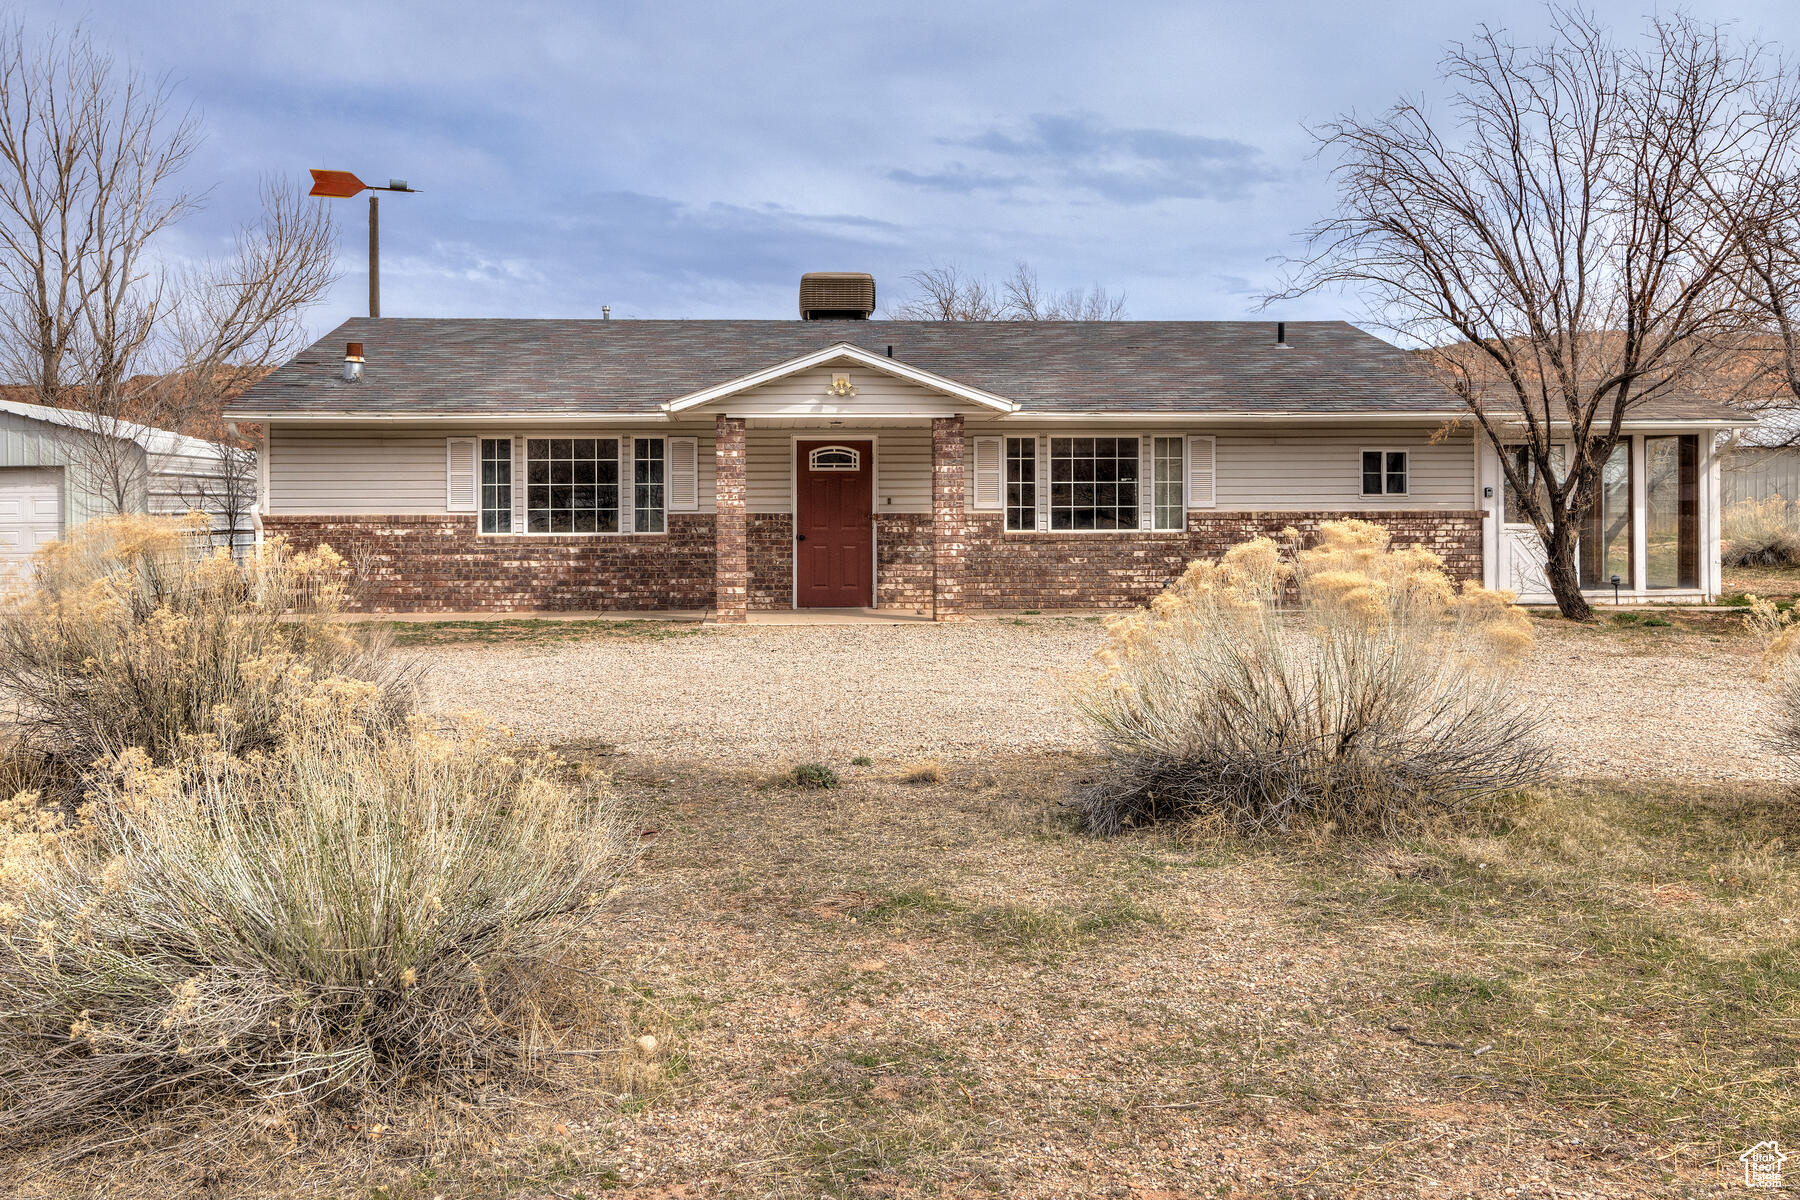 3971 S SPANISH VALLEY, Moab, Utah 84532, 3 Bedrooms Bedrooms, 9 Rooms Rooms,2 BathroomsBathrooms,Residential,For sale,SPANISH VALLEY,1986423